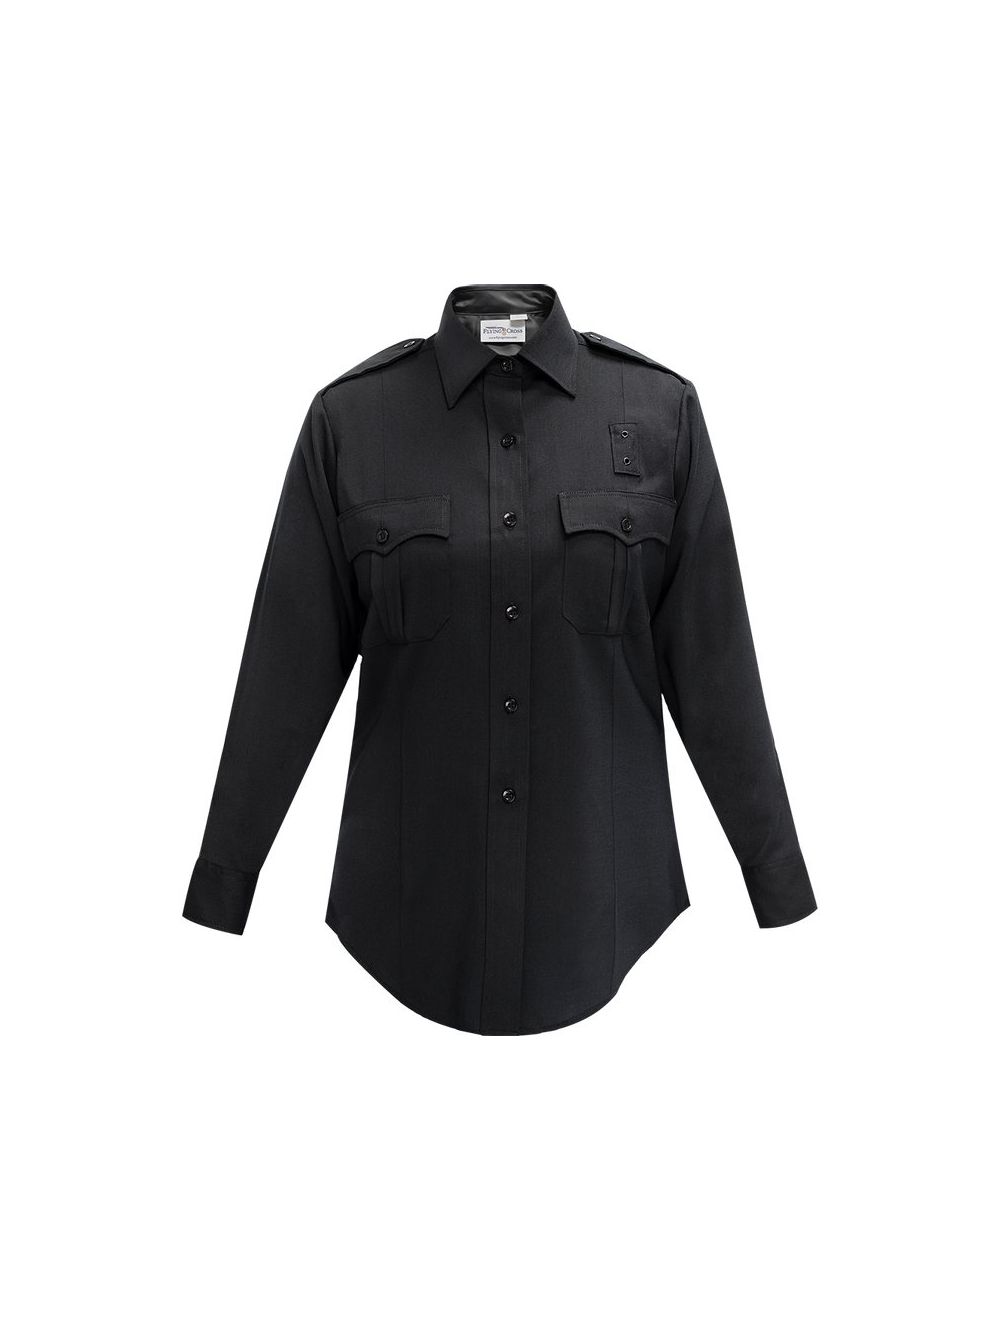 Justice Women's Long Sleeve Shirt - LAPD Navy